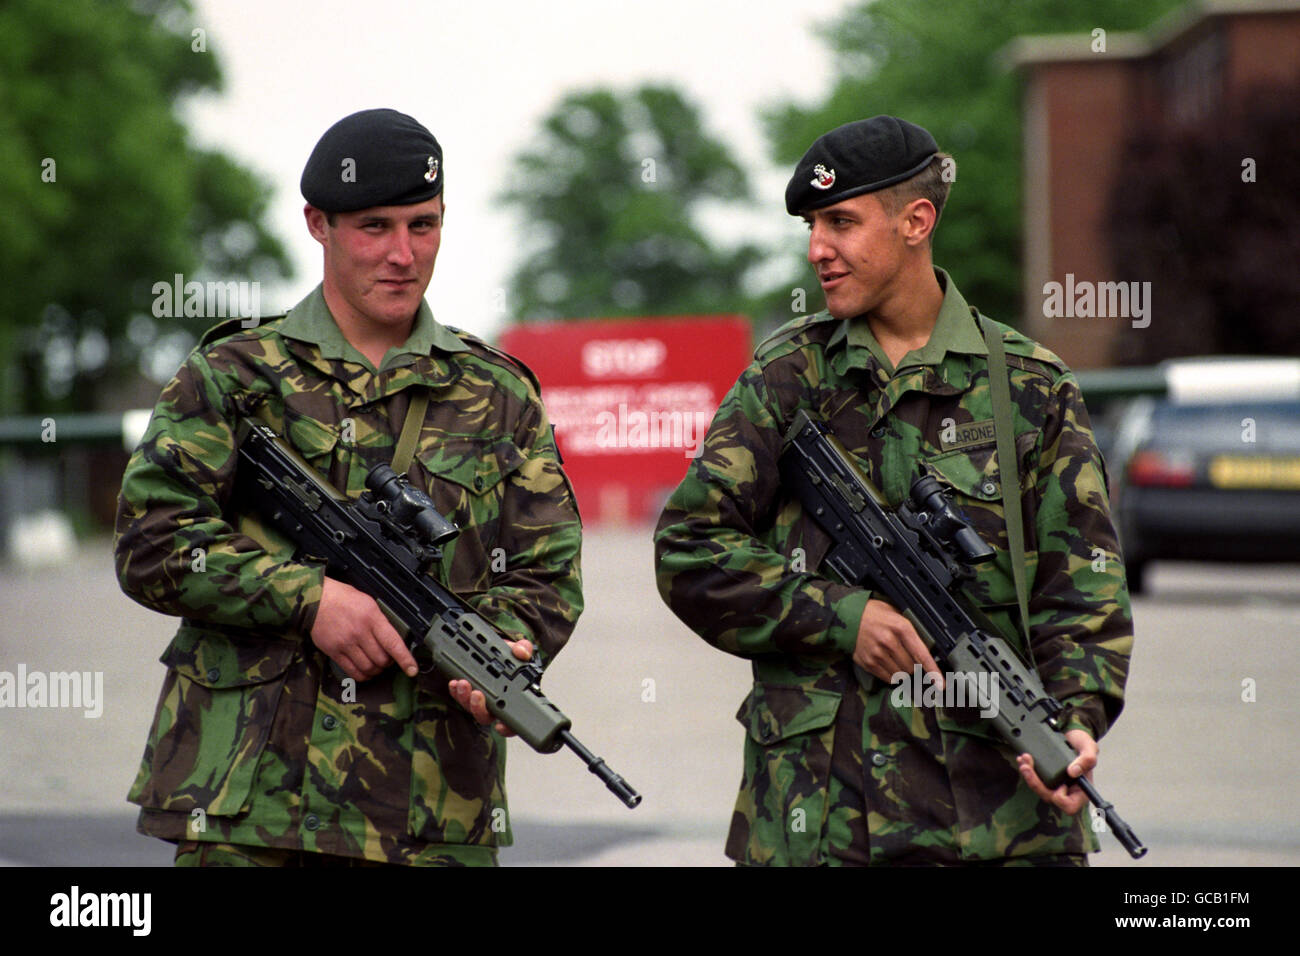 TWO SOLDIERS ON GUARD OUTSIDE THE HEADQUARTERS OF THE COLCHESTER GARRISON OF 24 AIRMOBILE BRIGADE FROM WHERE MEMBERS OF 19 REGIMENT ROYAL ARTILLERY ARE LEAVING FOR BOSNIA FOLLOWING THE SEIZURE OF 23 BRITISH UN TROOPS BY THE BOSNIAN SERB ARMY. Stock Photo